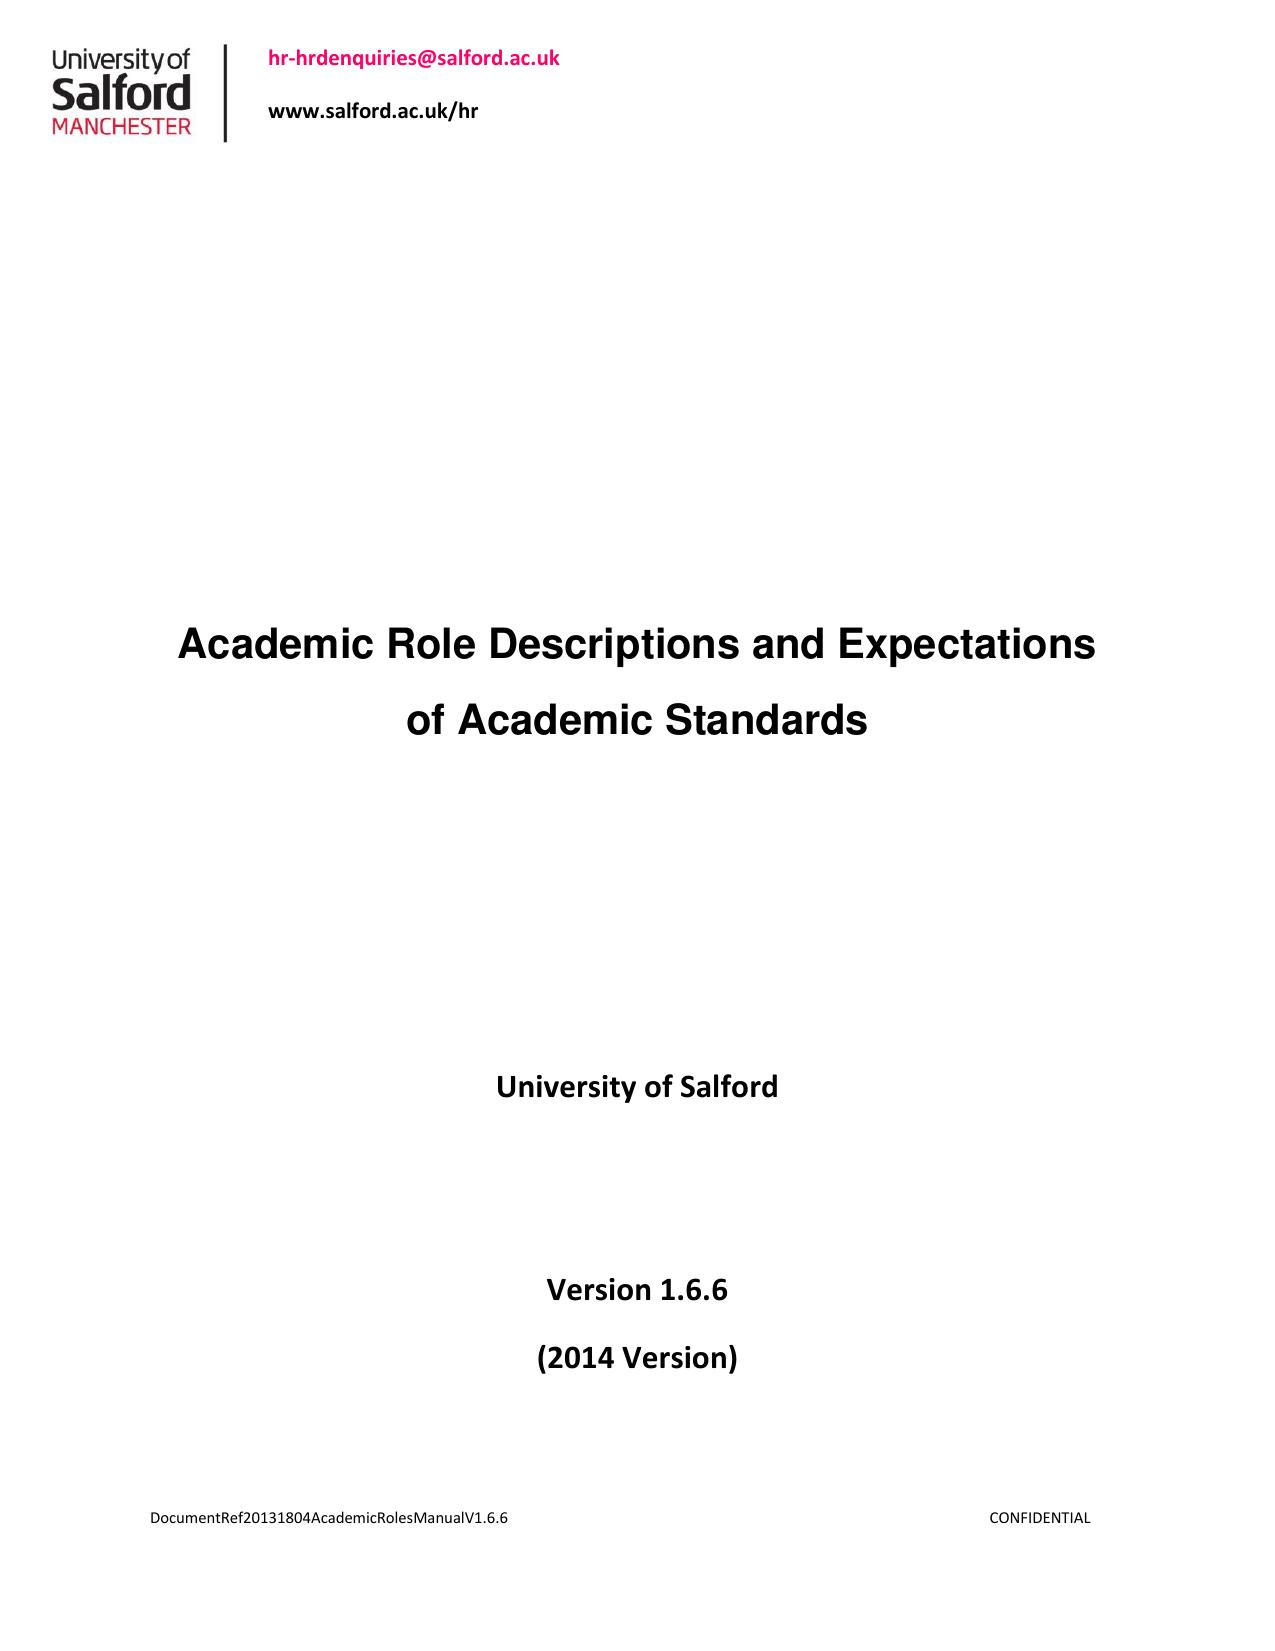 Academic Role Descriptions and Expectations 2014